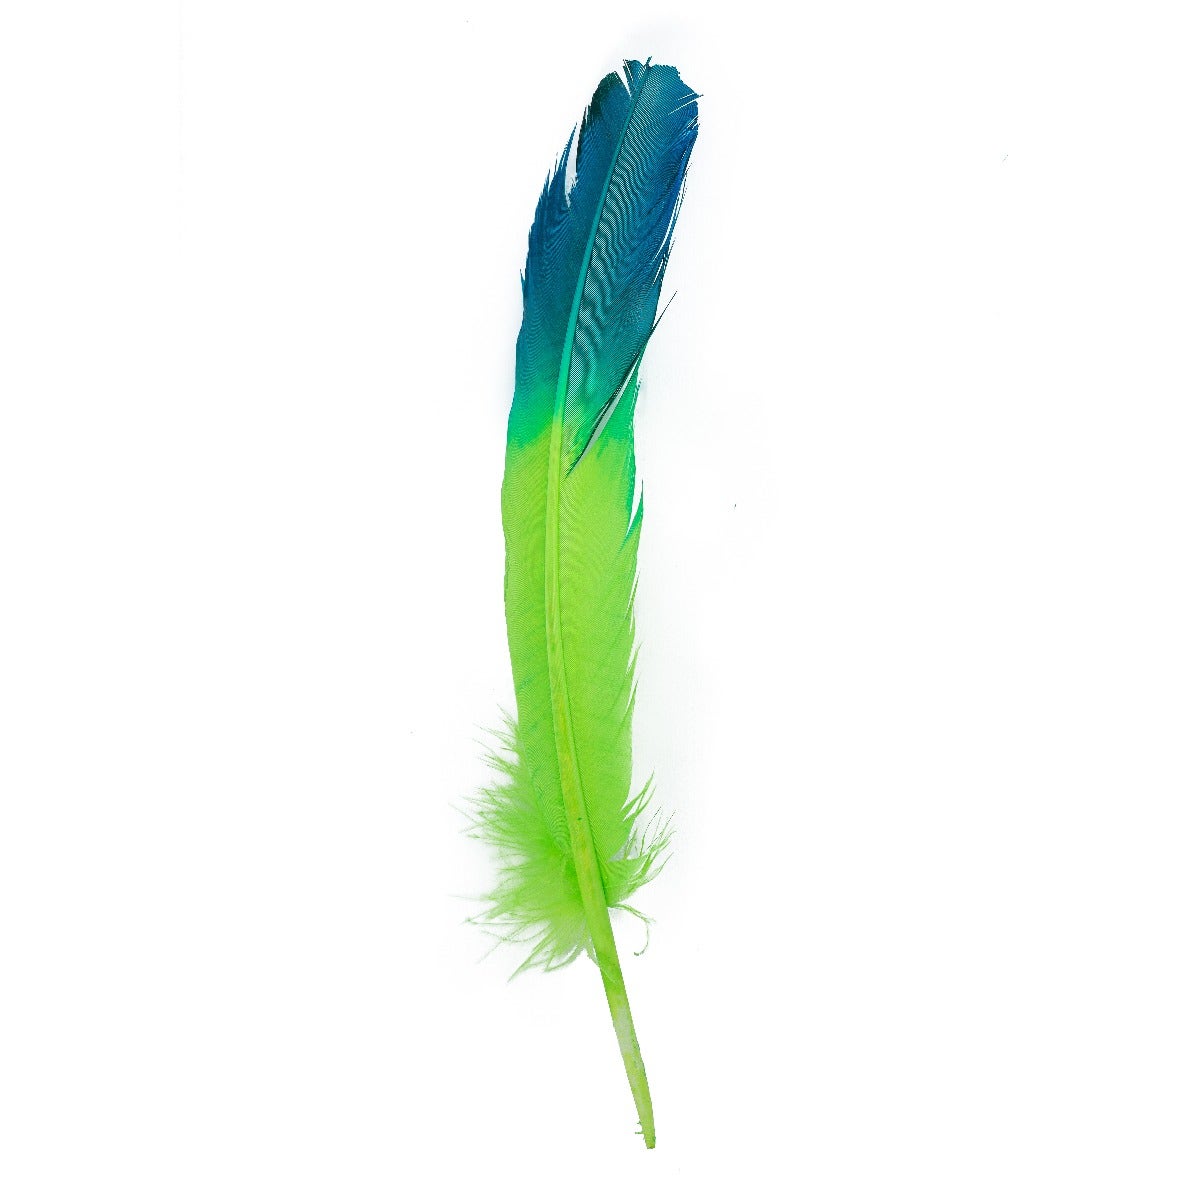 Ombré Turkey Quill Feathers 10-12” 2 pc -  Dark Turquoise - Lime